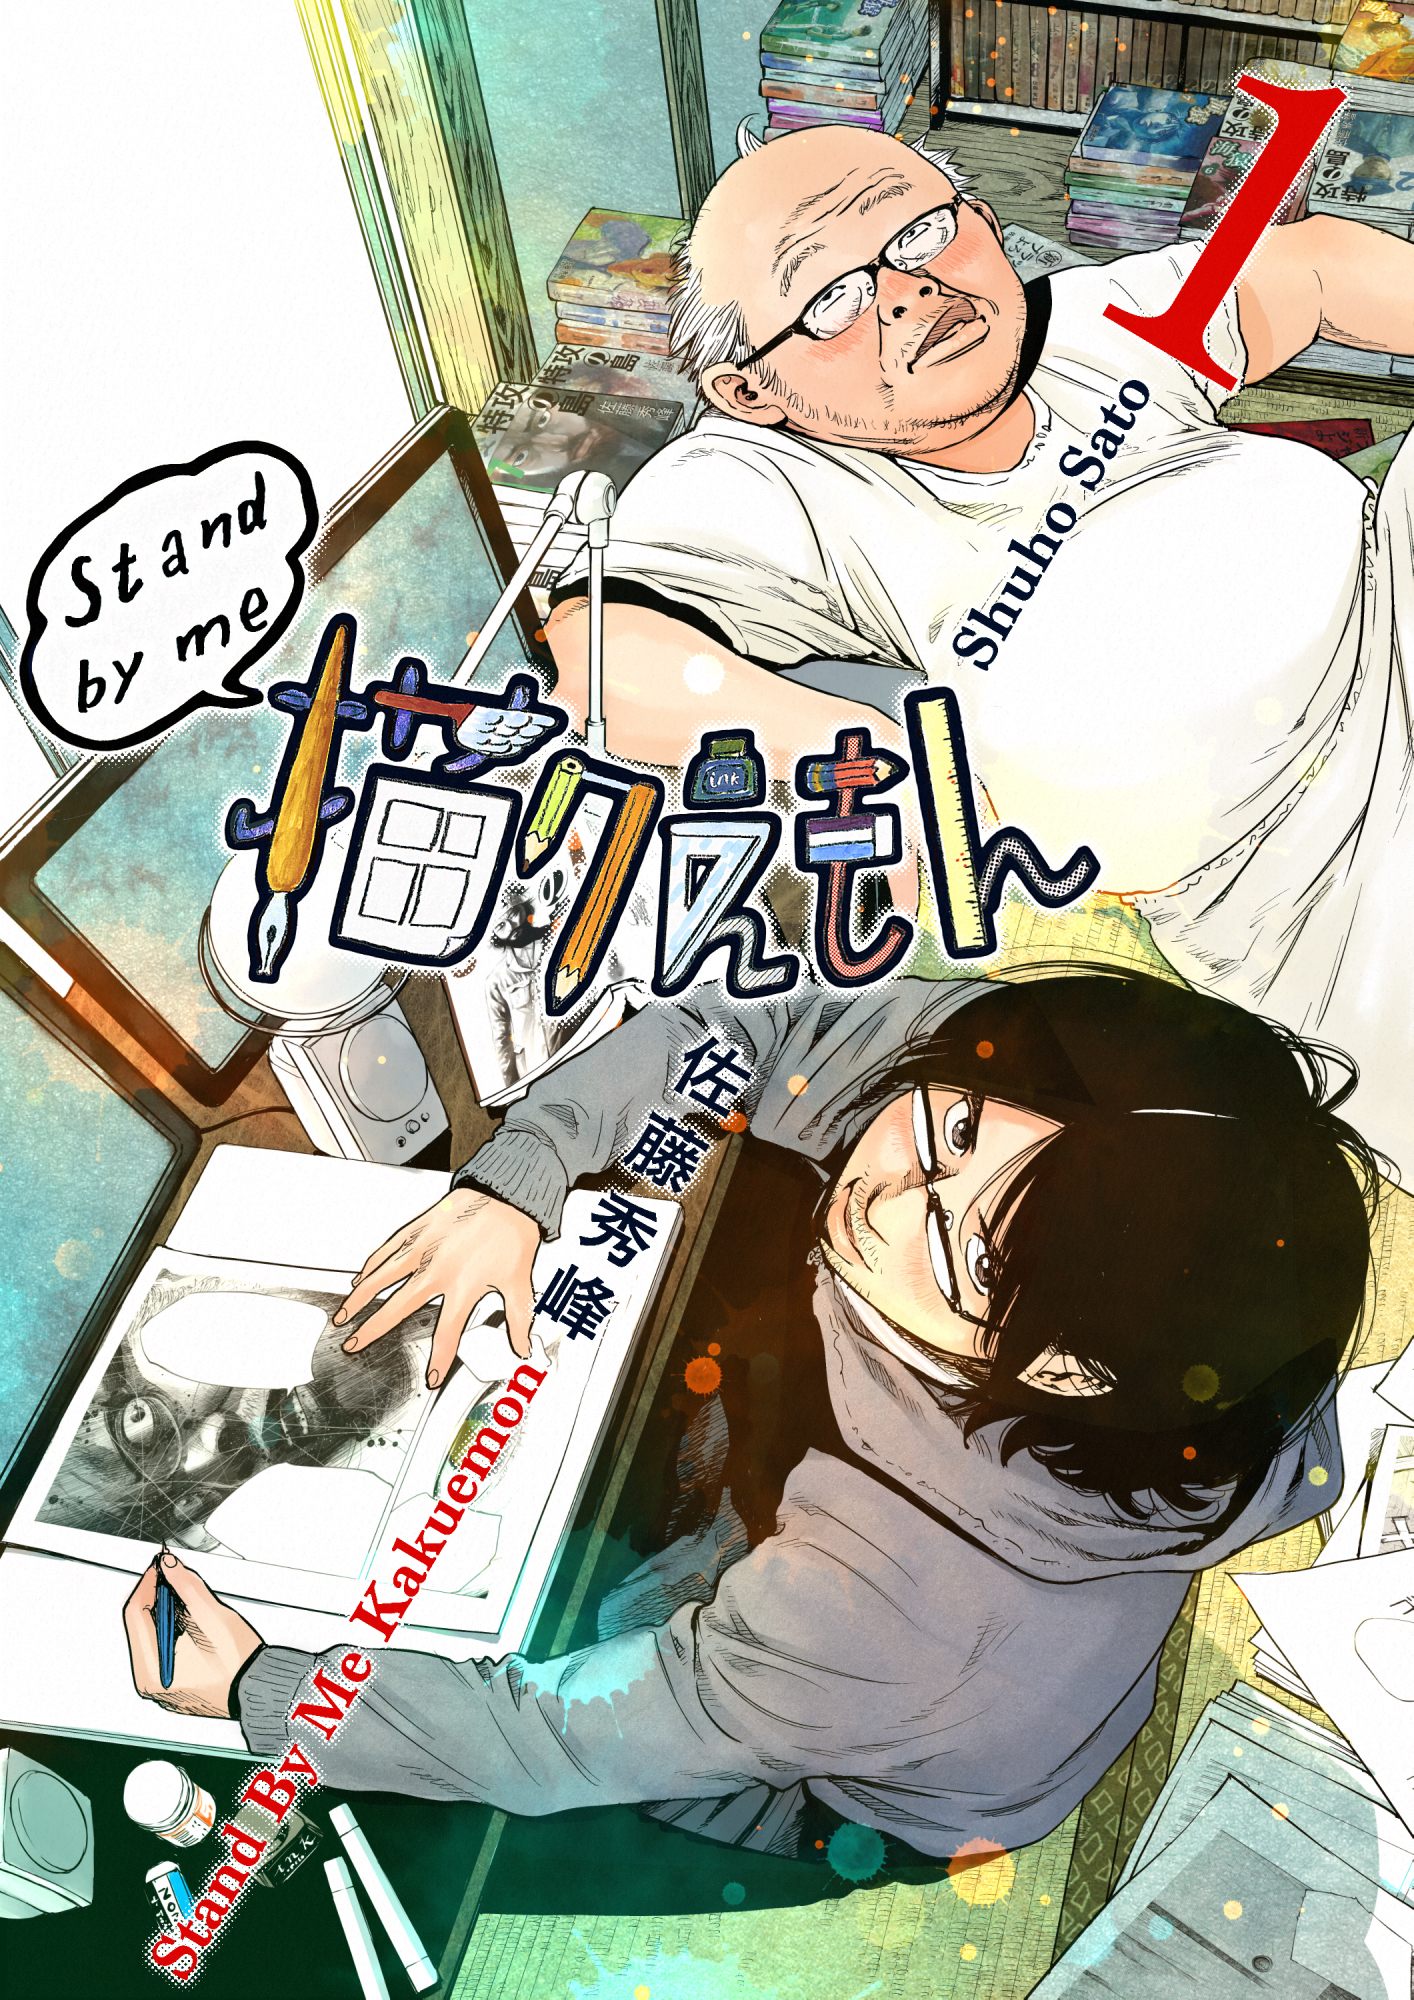 Stand By Me 描クえもん 1巻 漫画 無料試し読みなら 電子書籍ストア Booklive